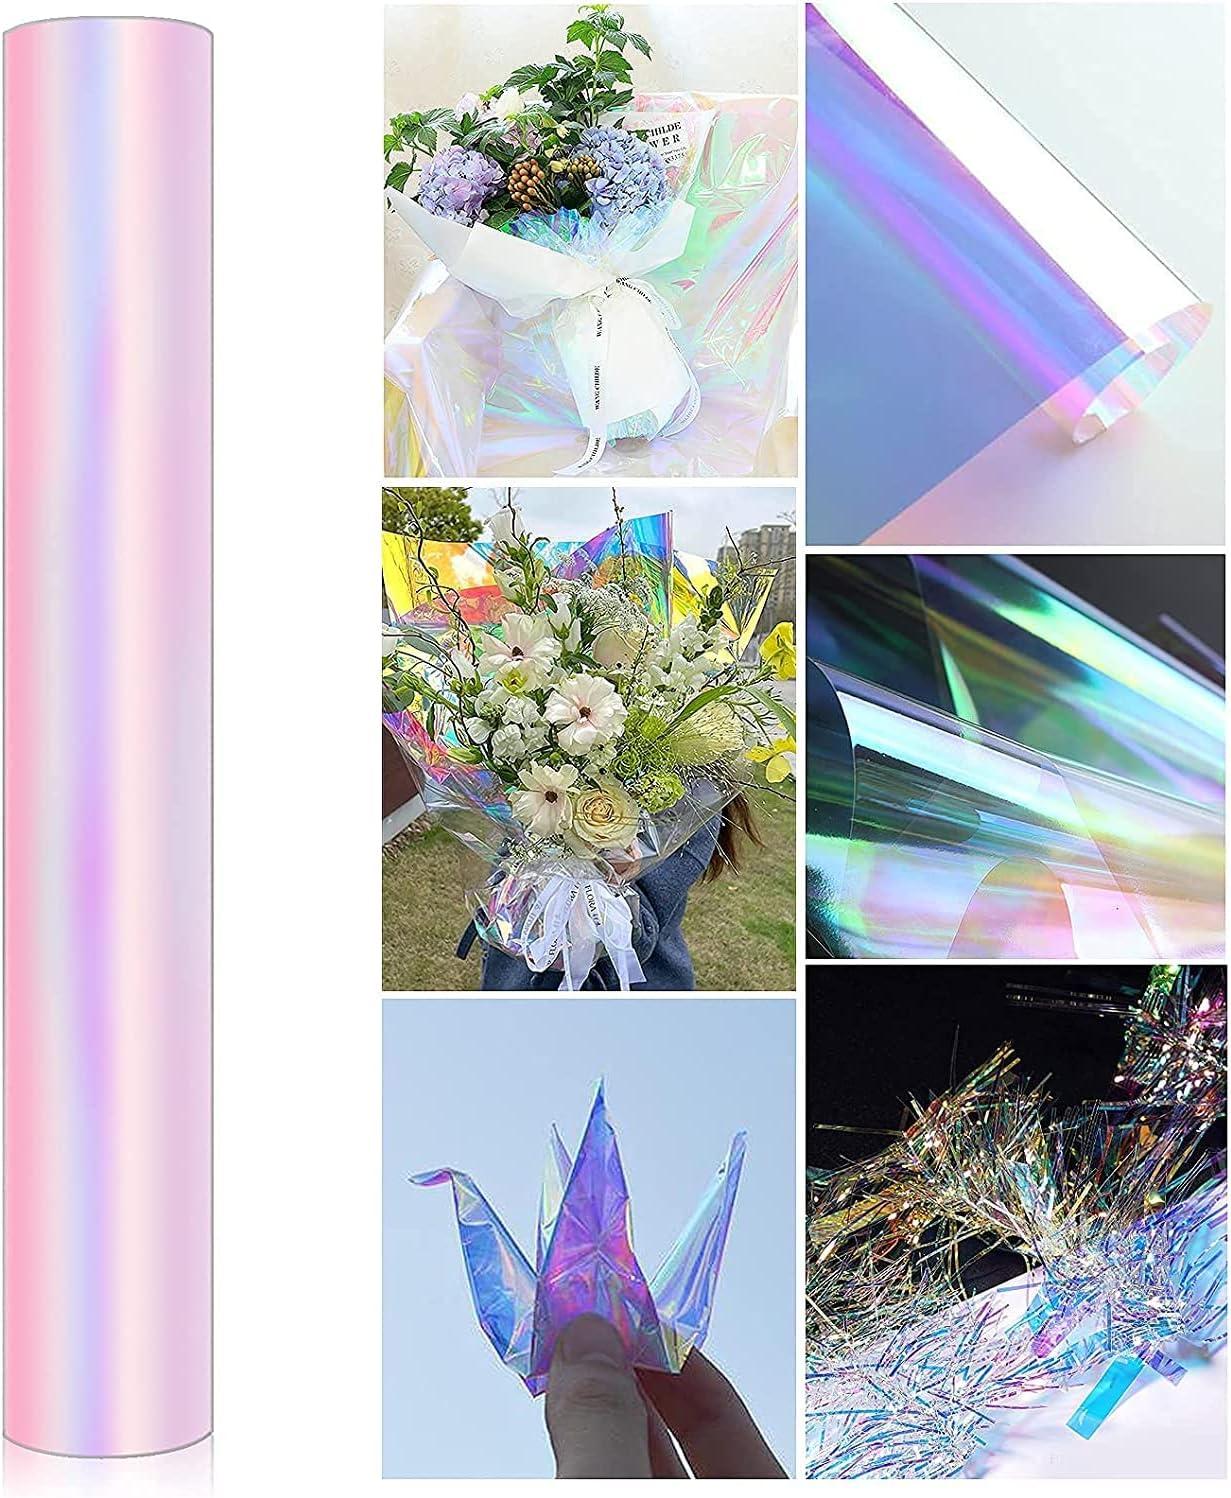 Holographic Wrapping Paper Christmas Birthday Gift Wrap Rolls